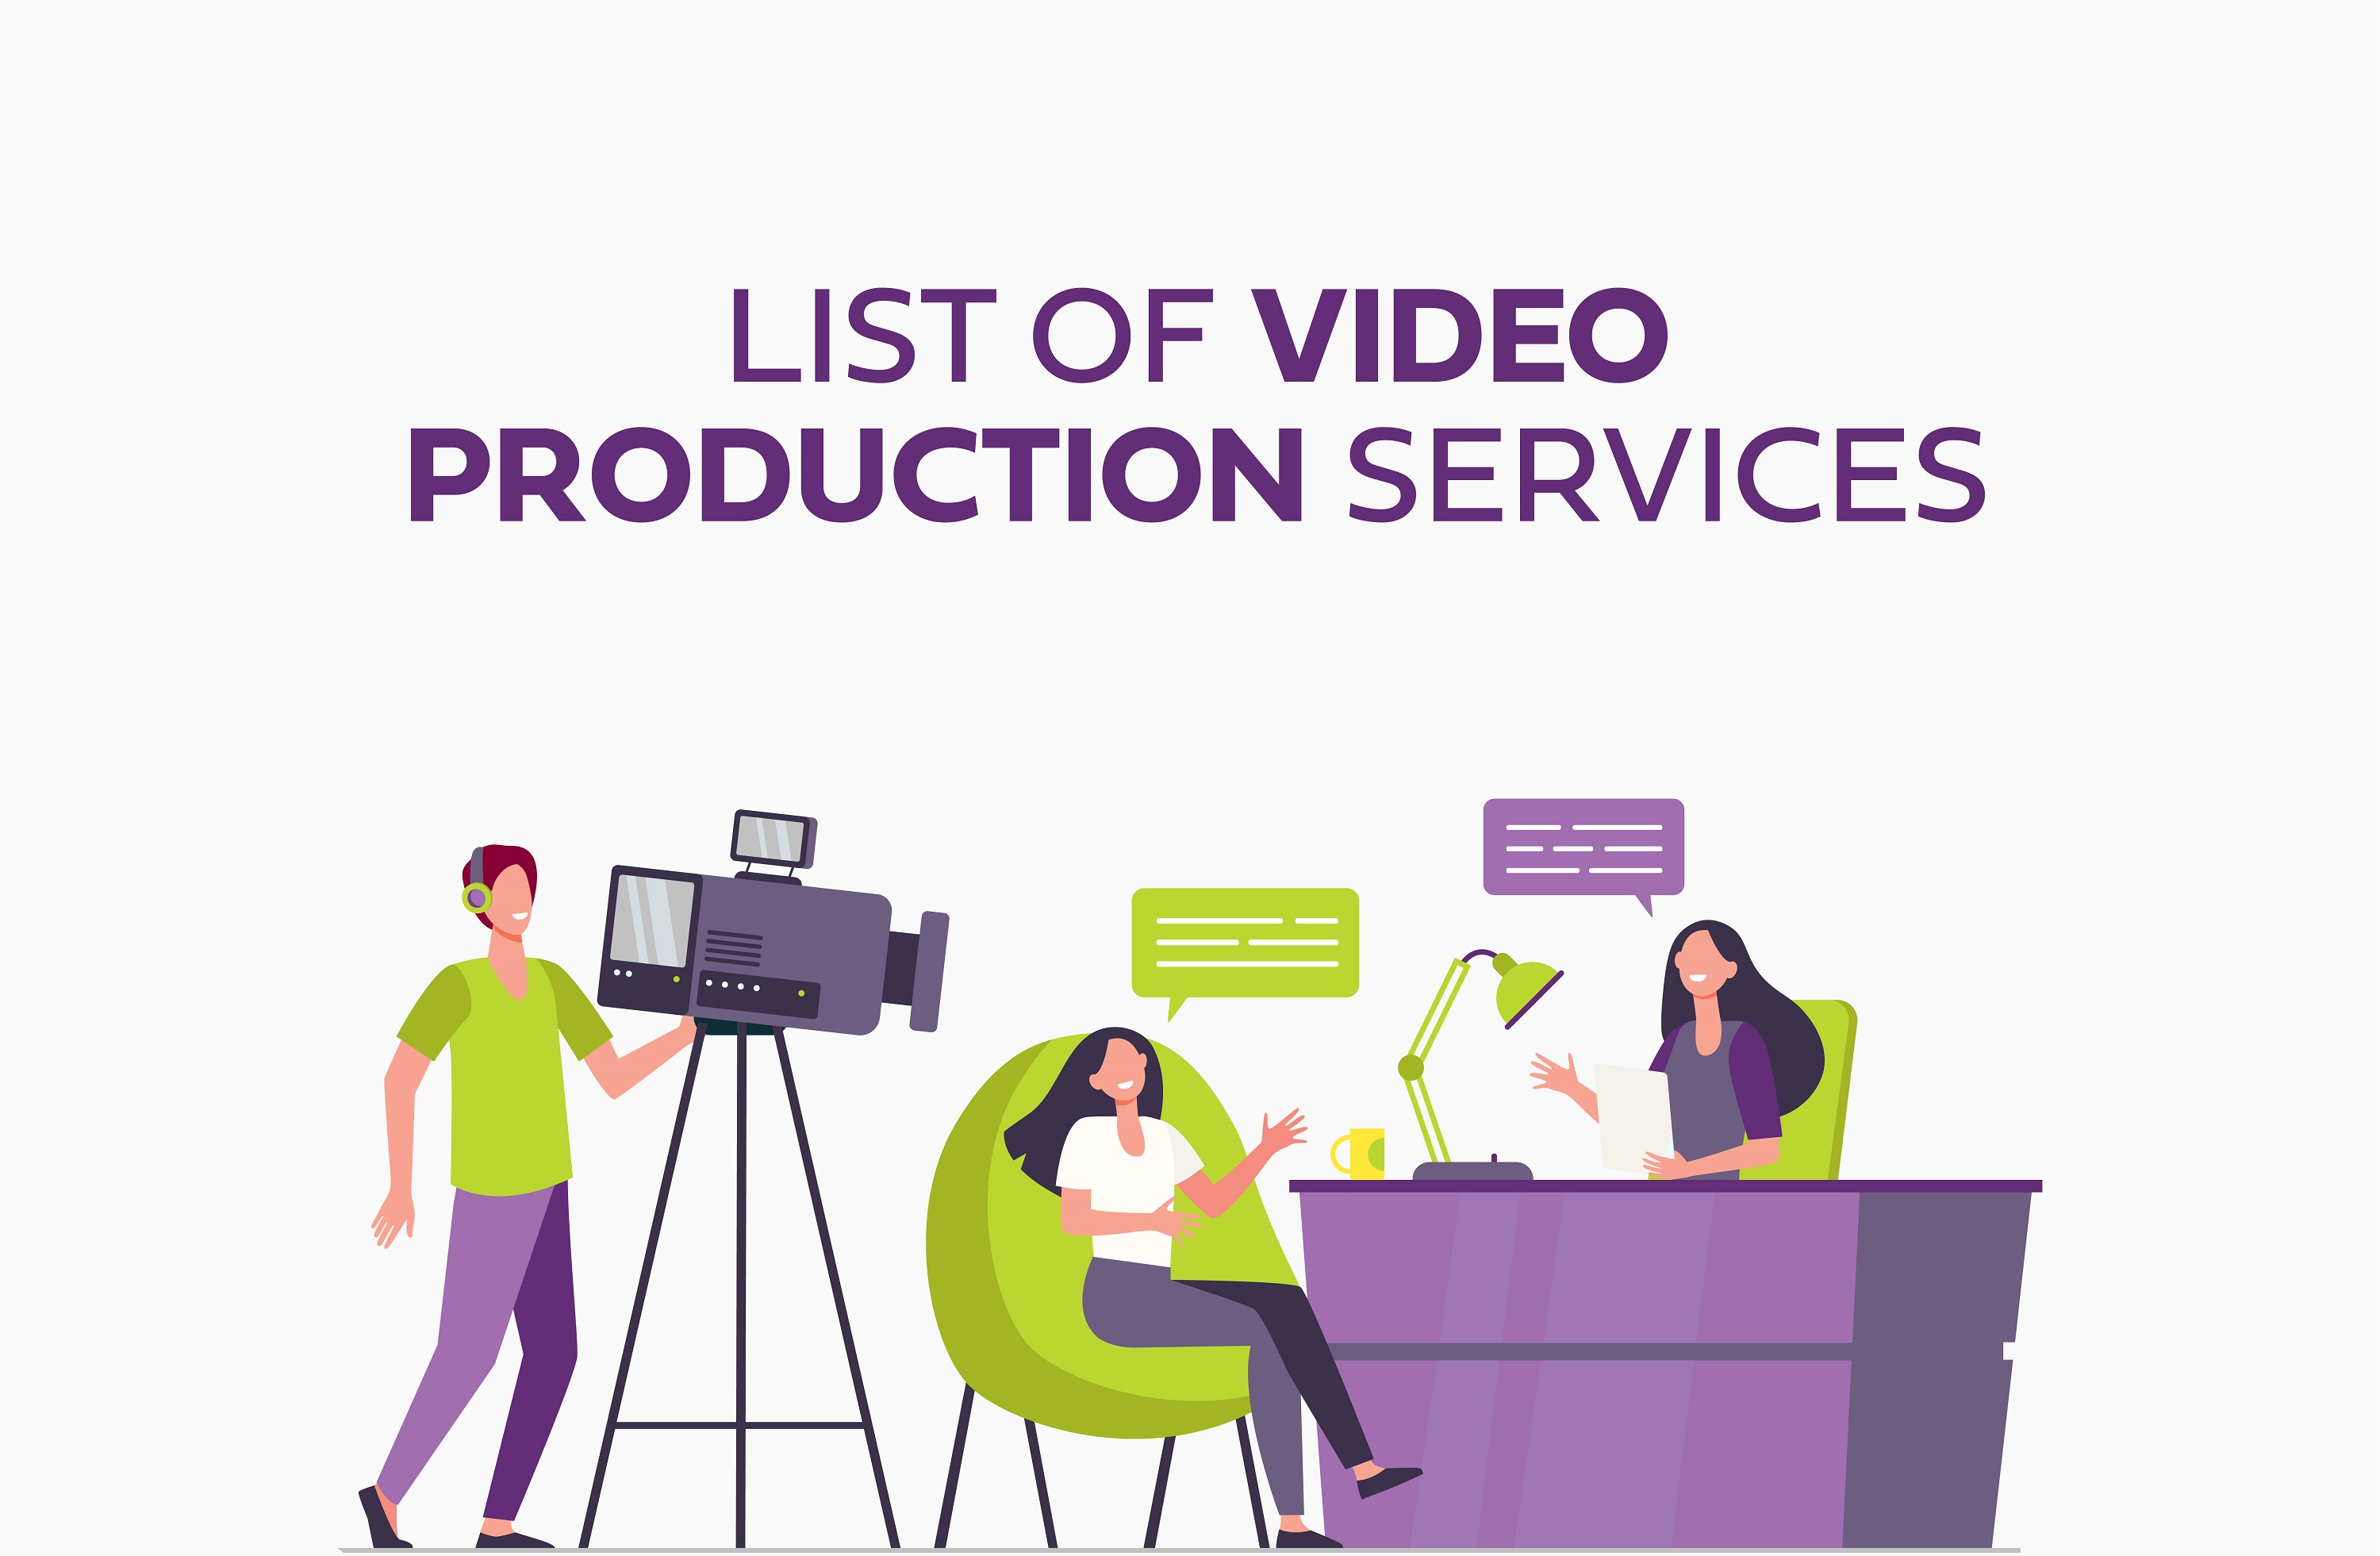 Video Production Services Provided By Corporate Companies